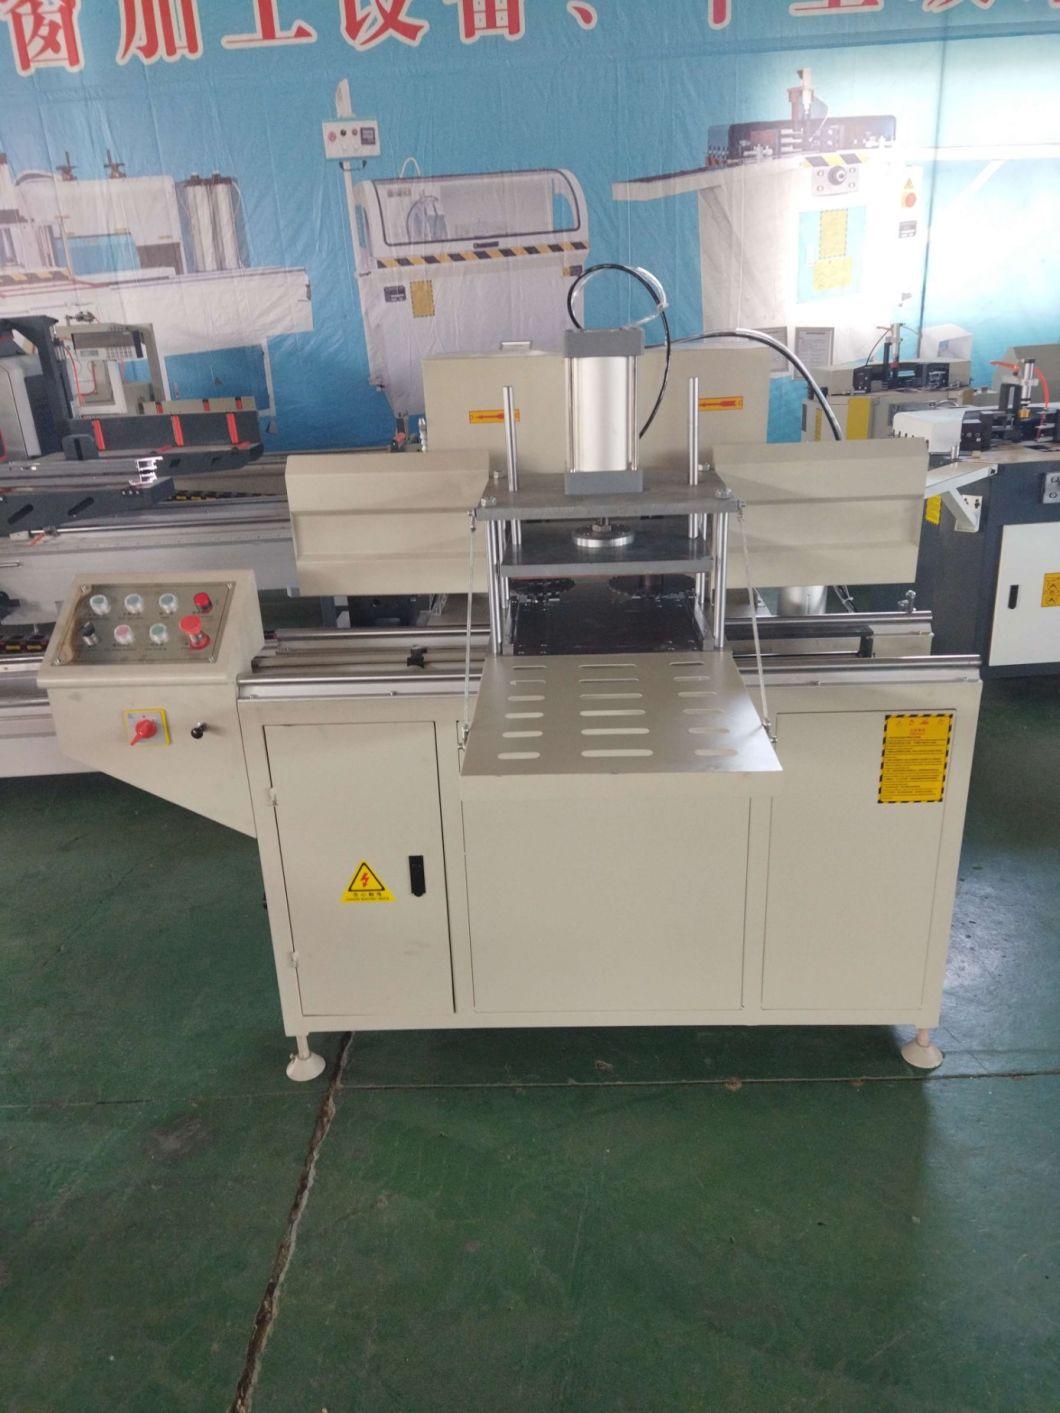 Lxd-200X4 Aluminum Profile Milling Machine for Endface Stepped Surfaces CNC Machine for Aluminum Doors and Windows Making CNC Cutter